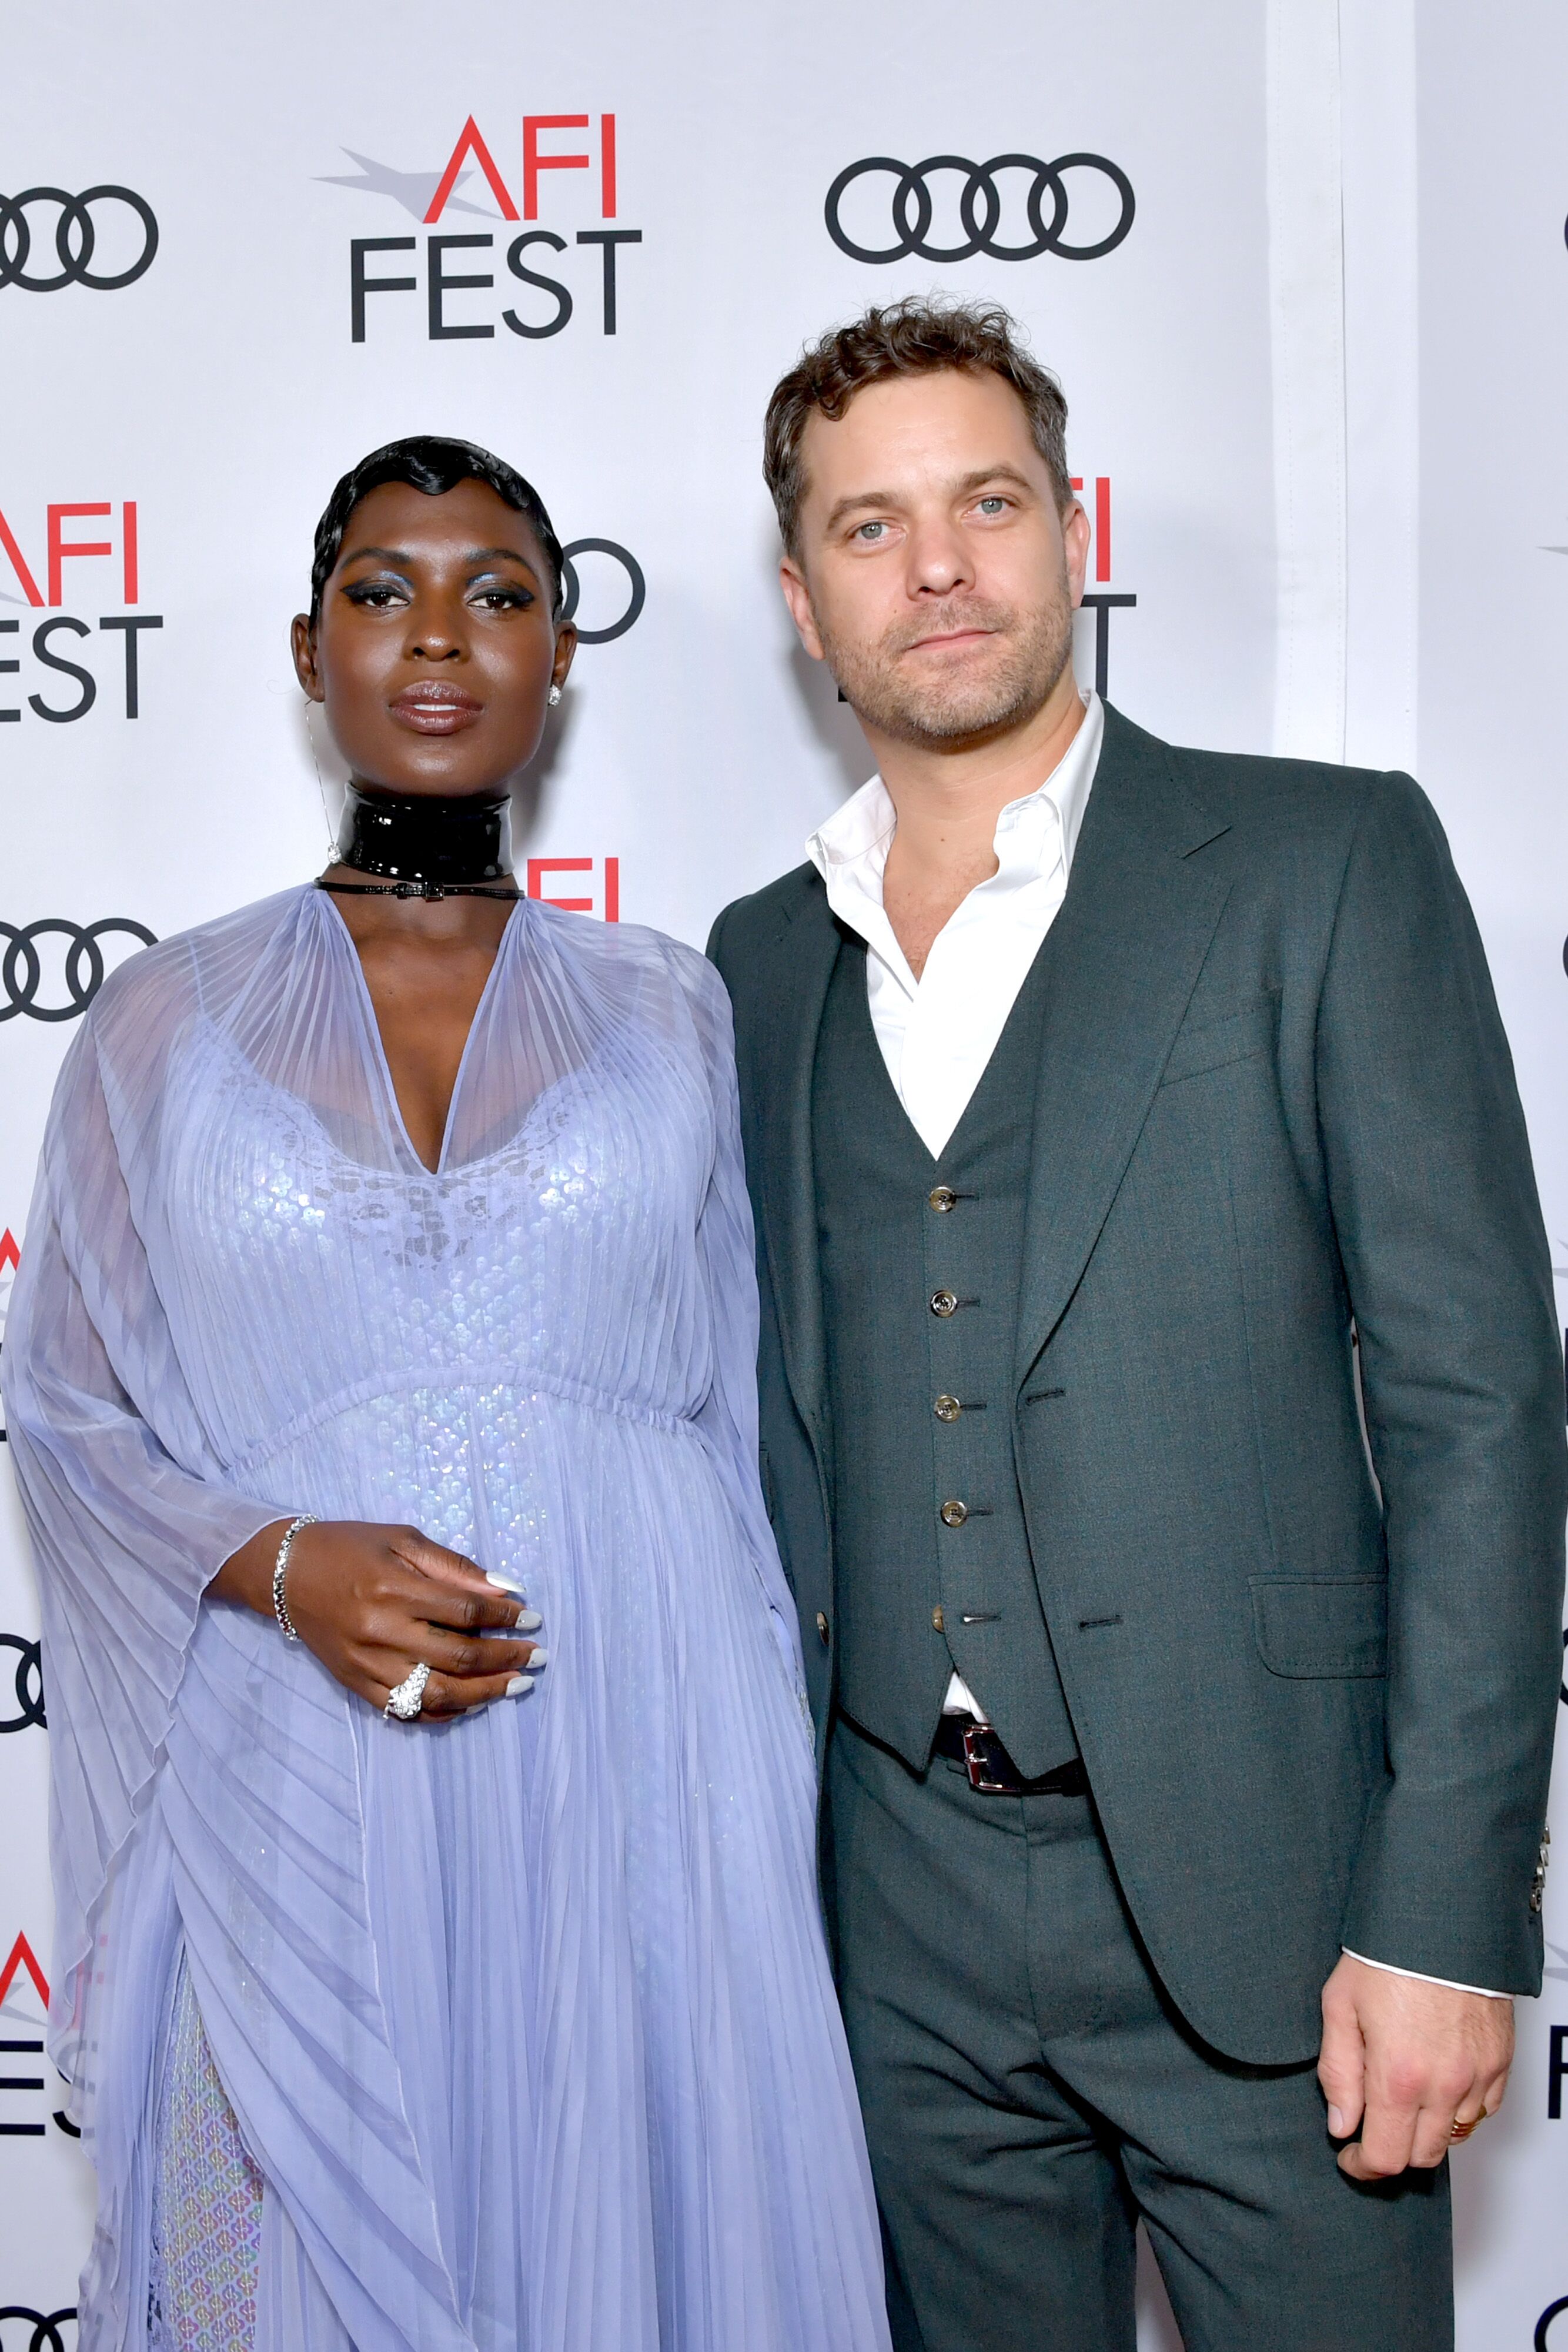 Jodie Turner-Smith and Joshua Jackson attend the "Queen & Slim" Premiere at AFI FEST 2019 presented by Audi at the TCL Chinese Theatre on November 14, 2019 in Hollywood, California. | Source: Getty Images